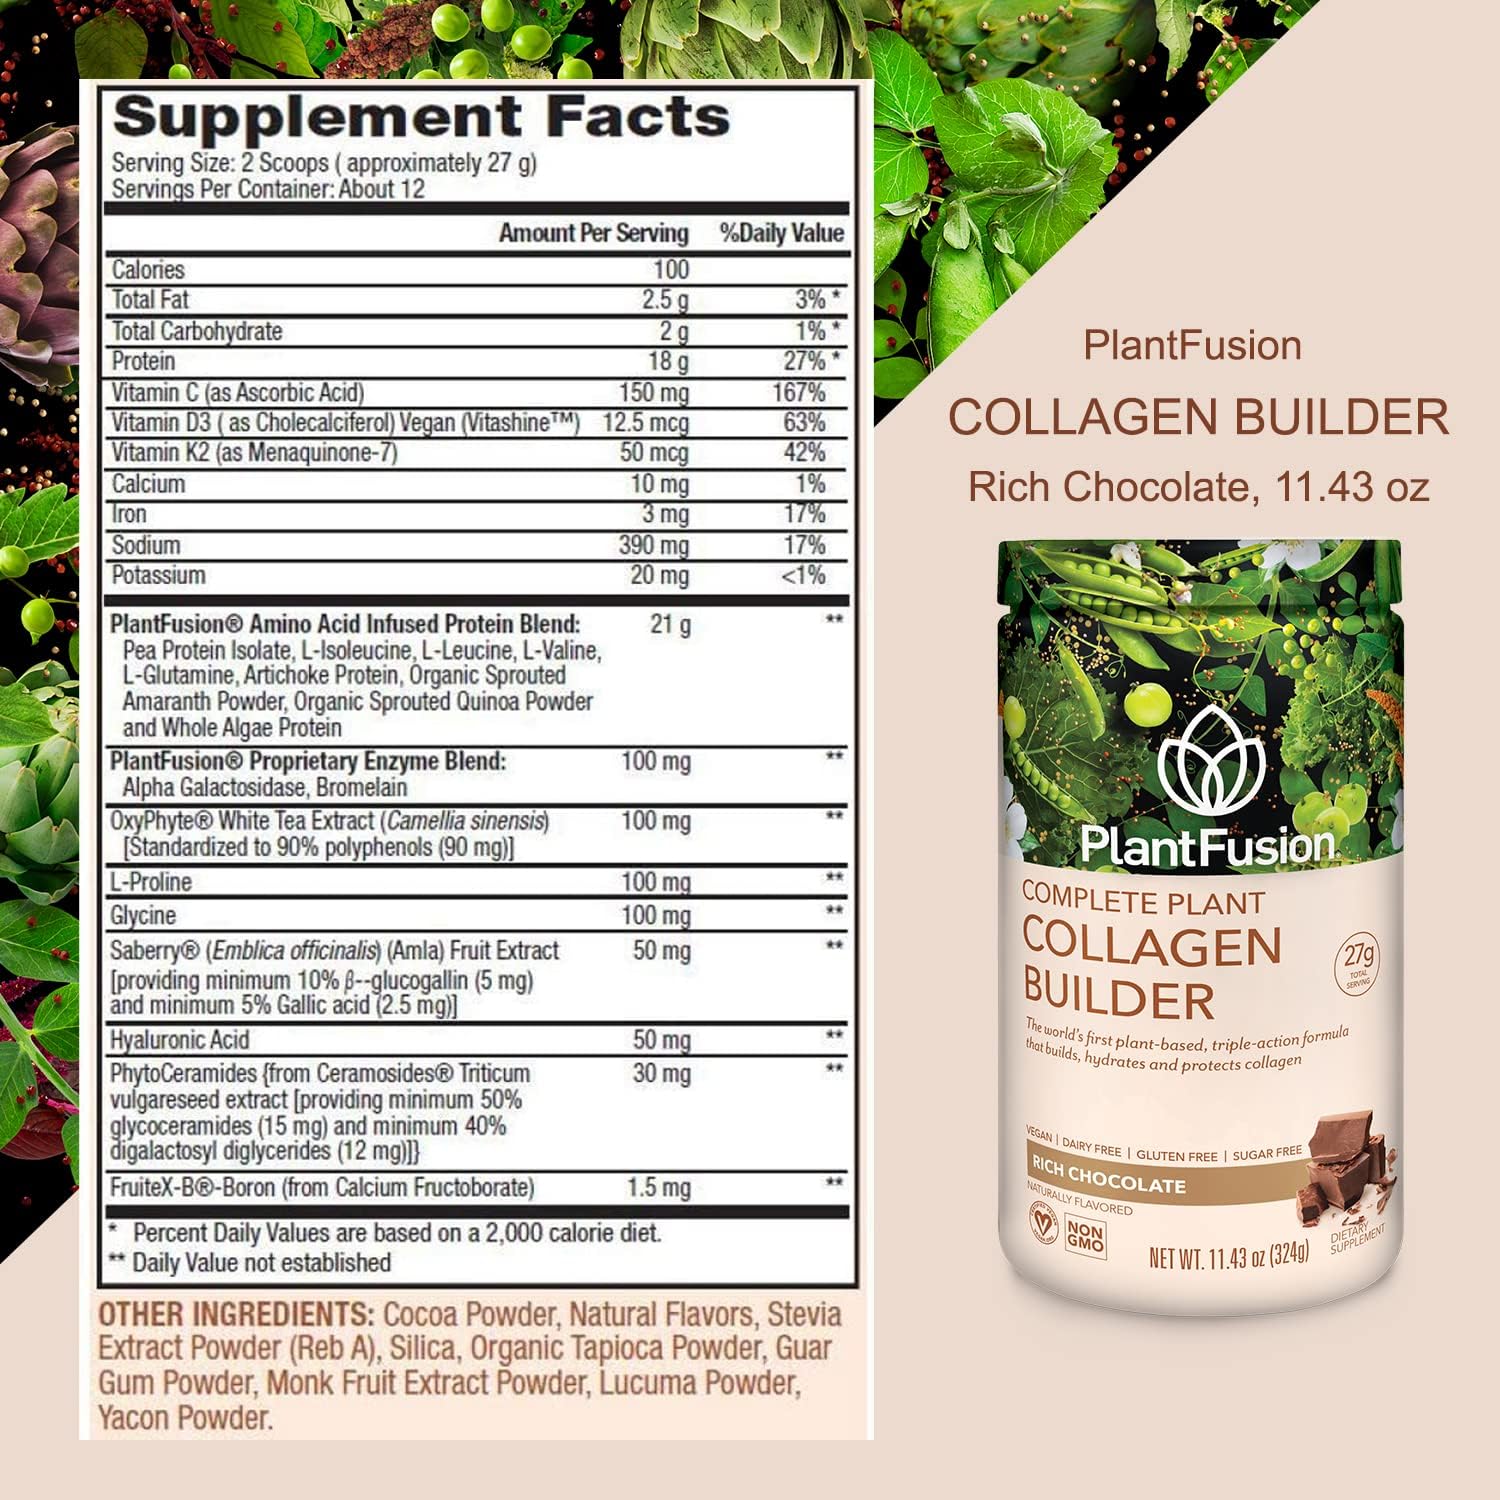 PlantFusion Vegan Collagen Powder - Plant Based Collagen Protein Powder For Muscle & Joints, Hair, Skin & Nails - Keto, Gluten Free, Soy Free, Non-Dairy, No Sugar, Non-GMO - Chocolate 11.43 oz